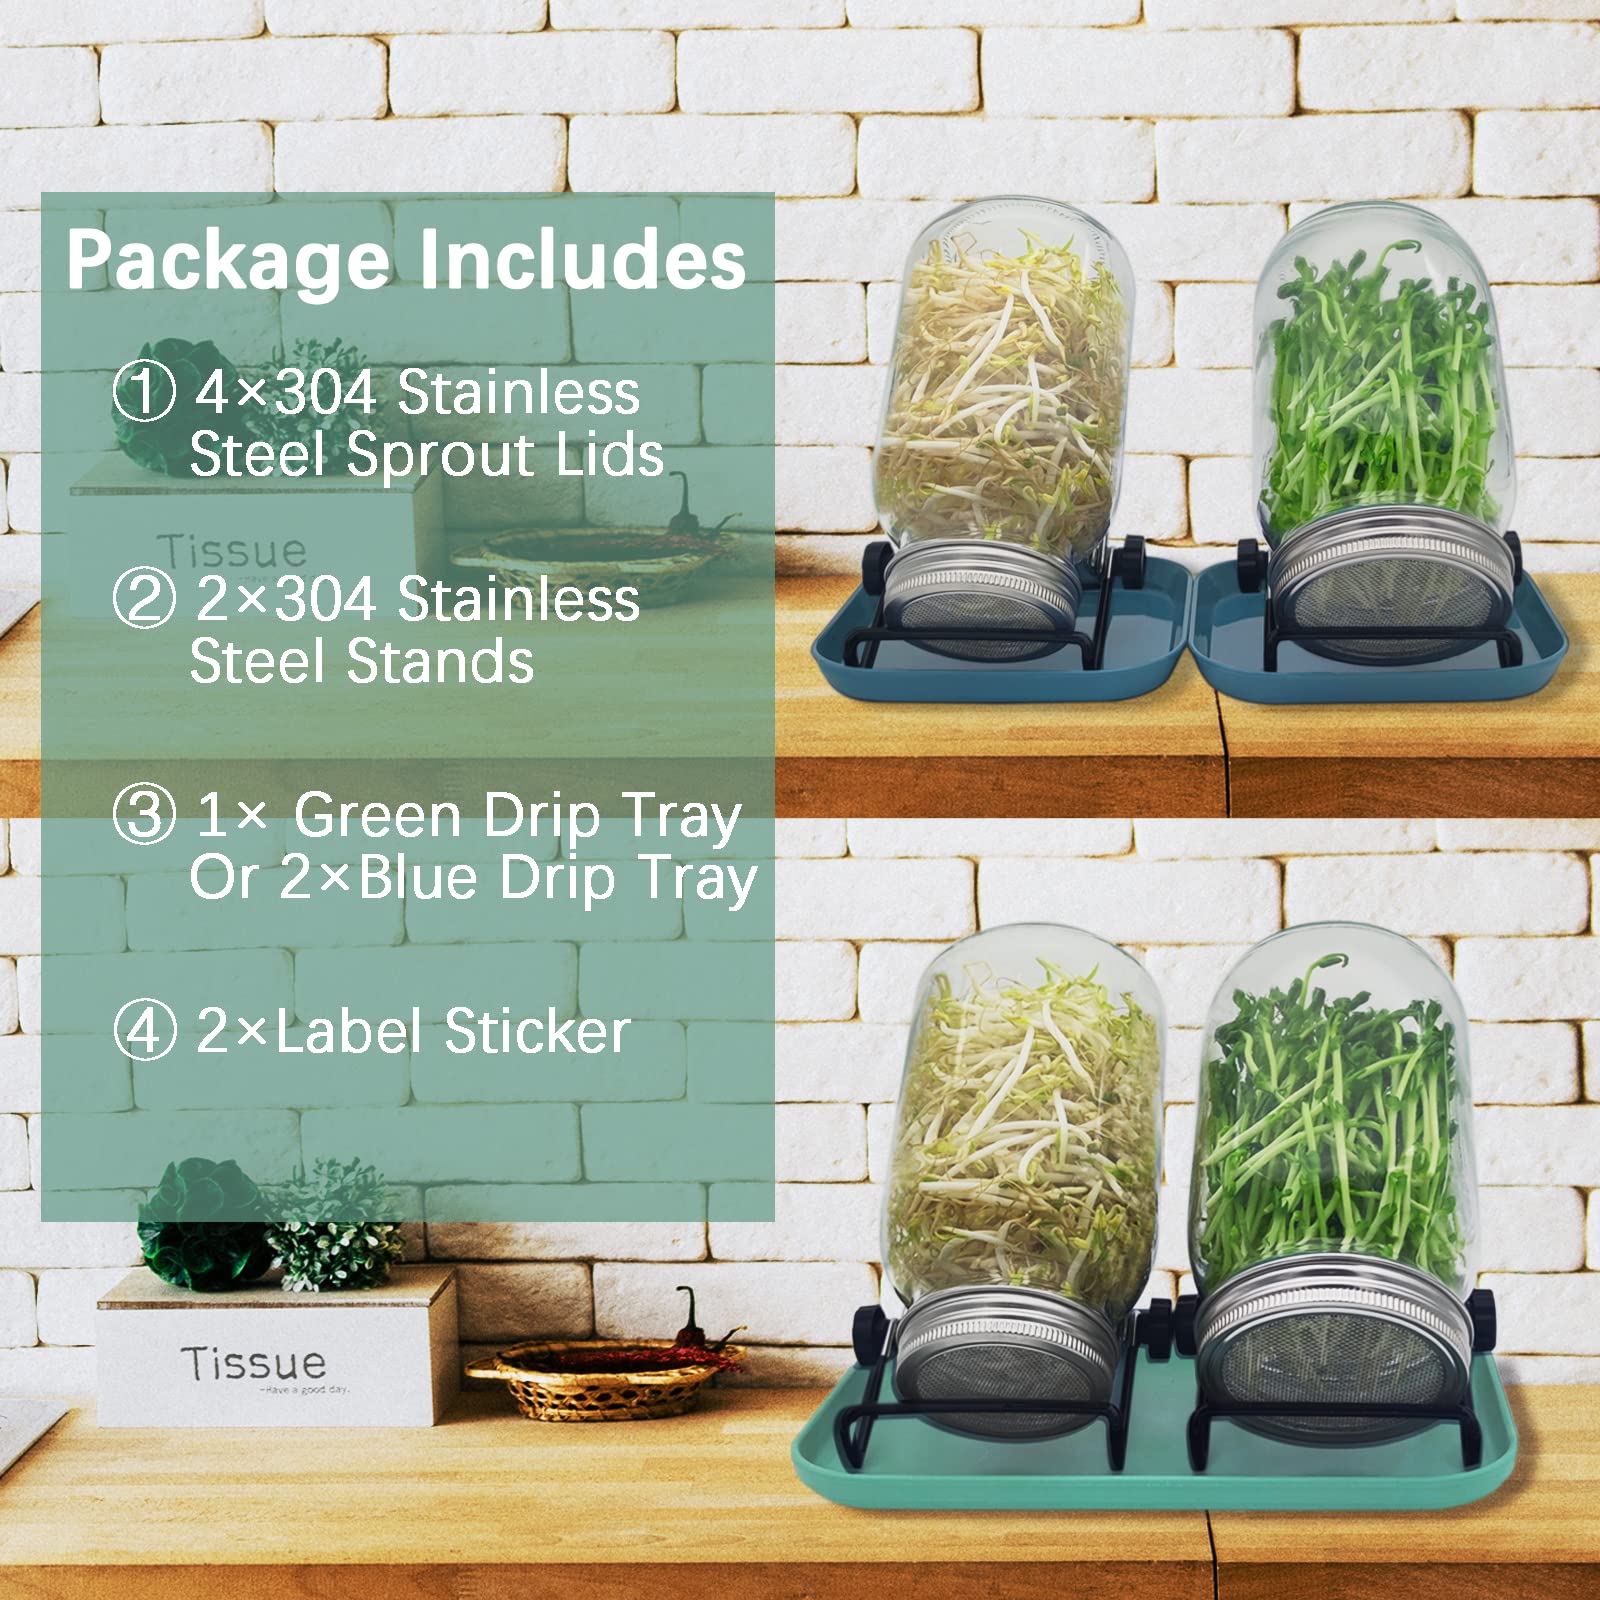 Guyemnat Sprouting Kit, 4 PCS Stainless Steel Sprouting Lids for Regular and Wide Mouth Mason Jars, 2 Sprouting Stands,Sprouting Tray,Label sticker,Sprouts Growing Kit (Not Include Mason Jar)